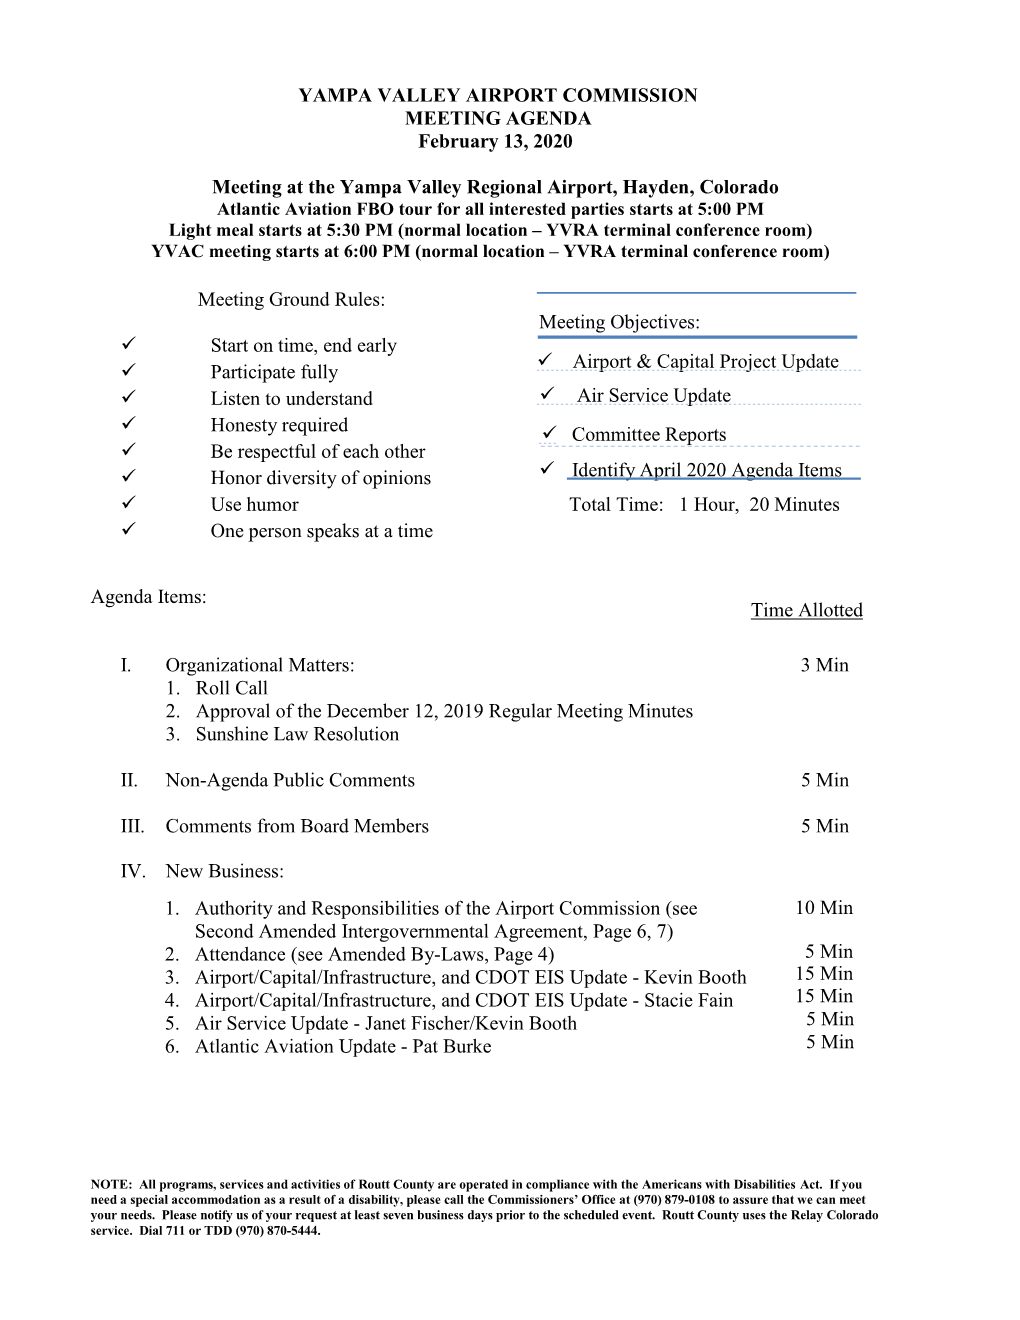 YAMPA VALLEY AIRPORT COMMISSION MEETING AGENDA February 13, 2020